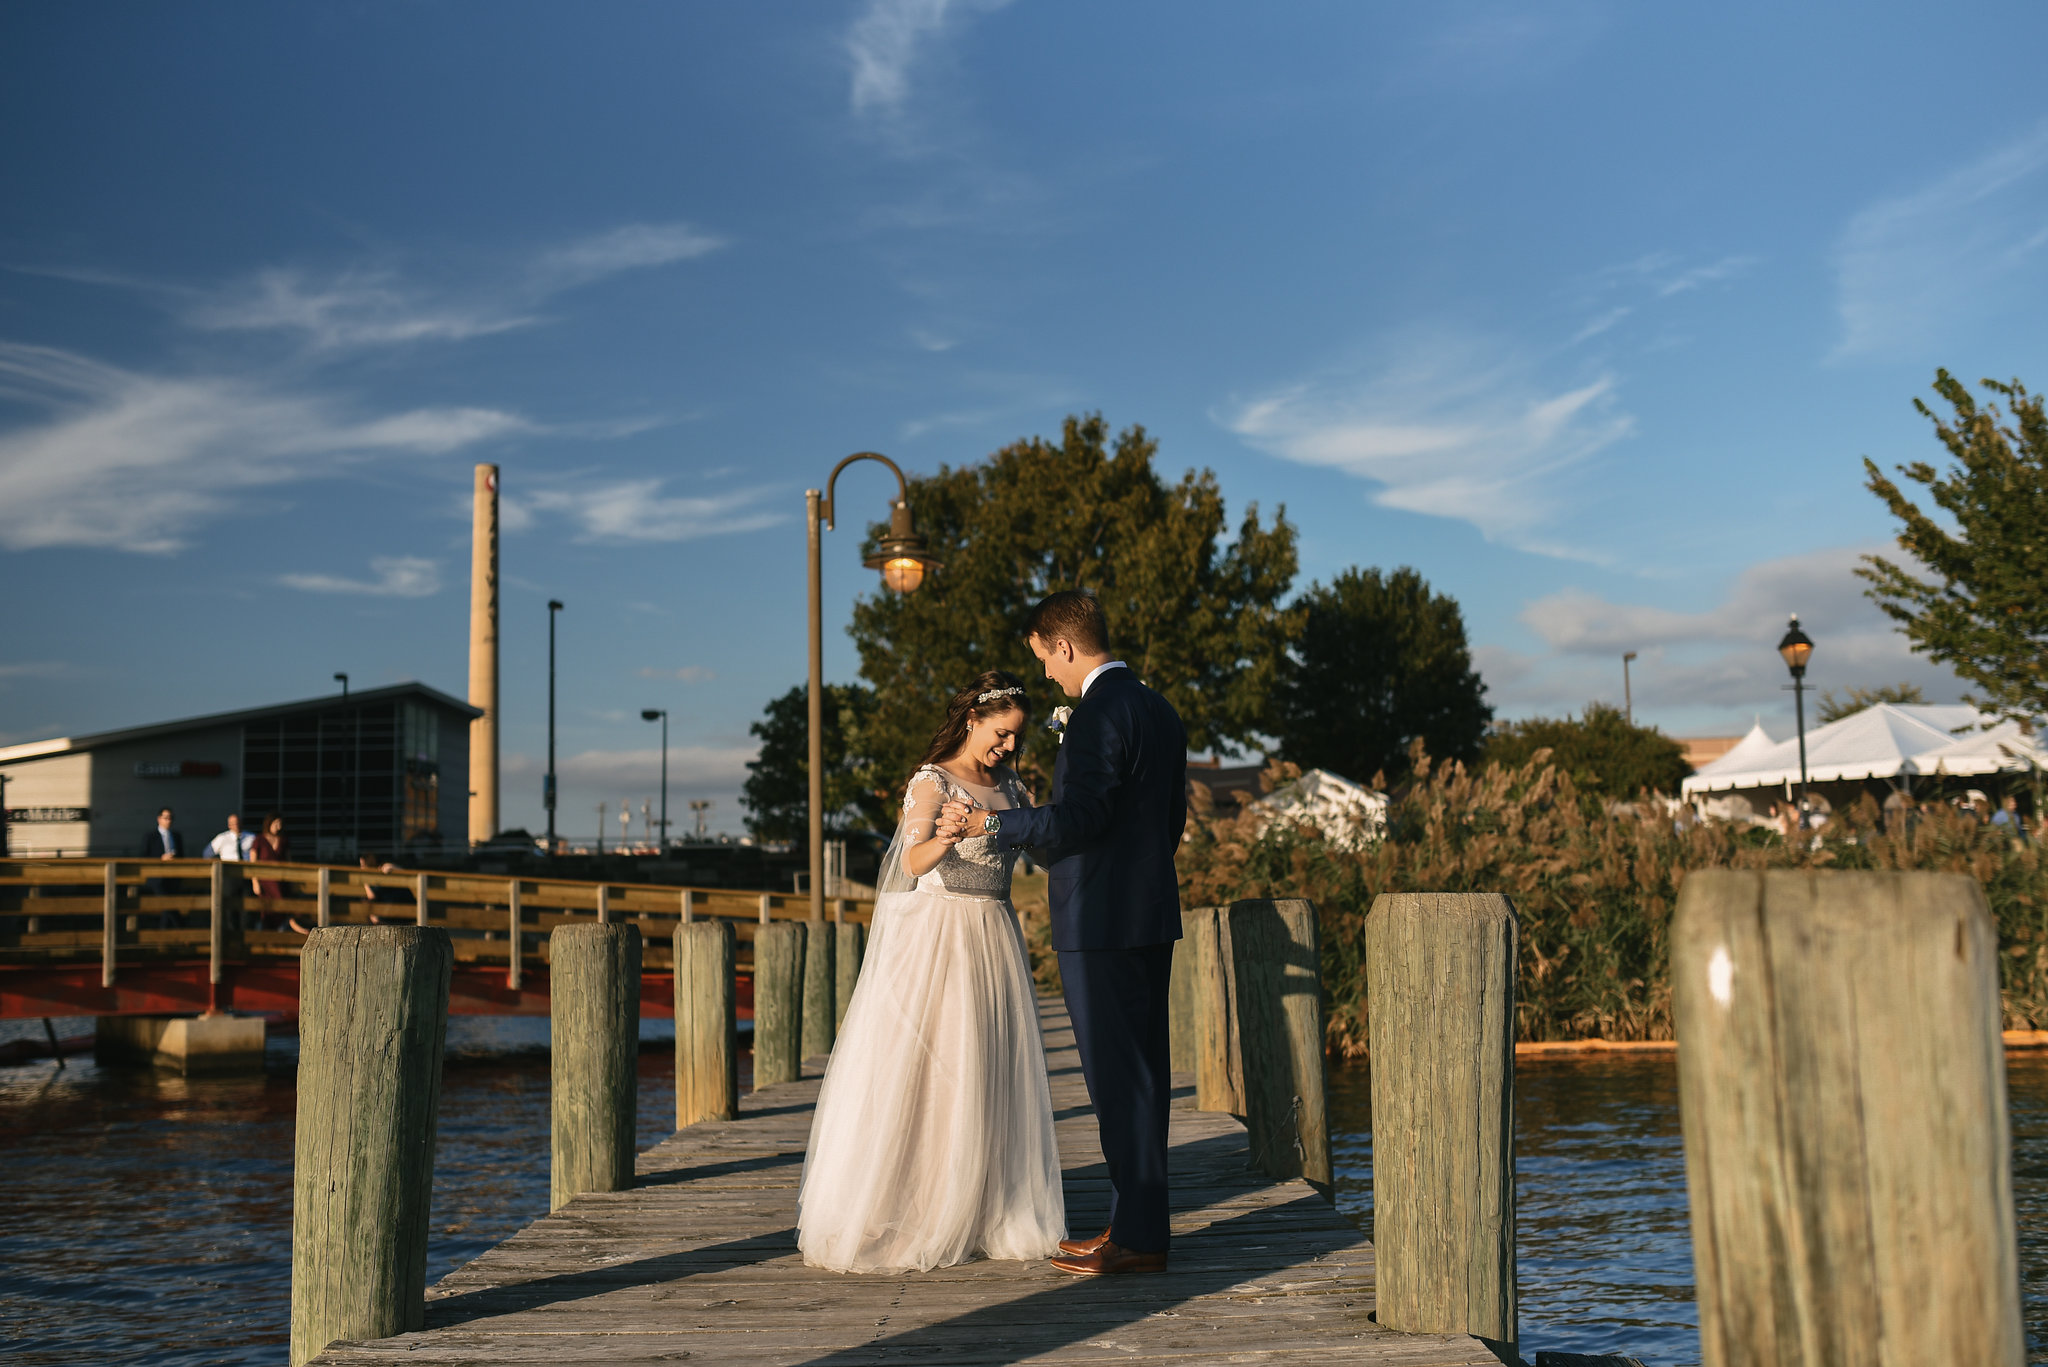  Baltimore, Canton, Modern, Outdoor Reception, Maryland Wedding Photographer, Romantic, Classic, Boston Street Pier Park, Bride and groom dancing on pier, Waterfront 